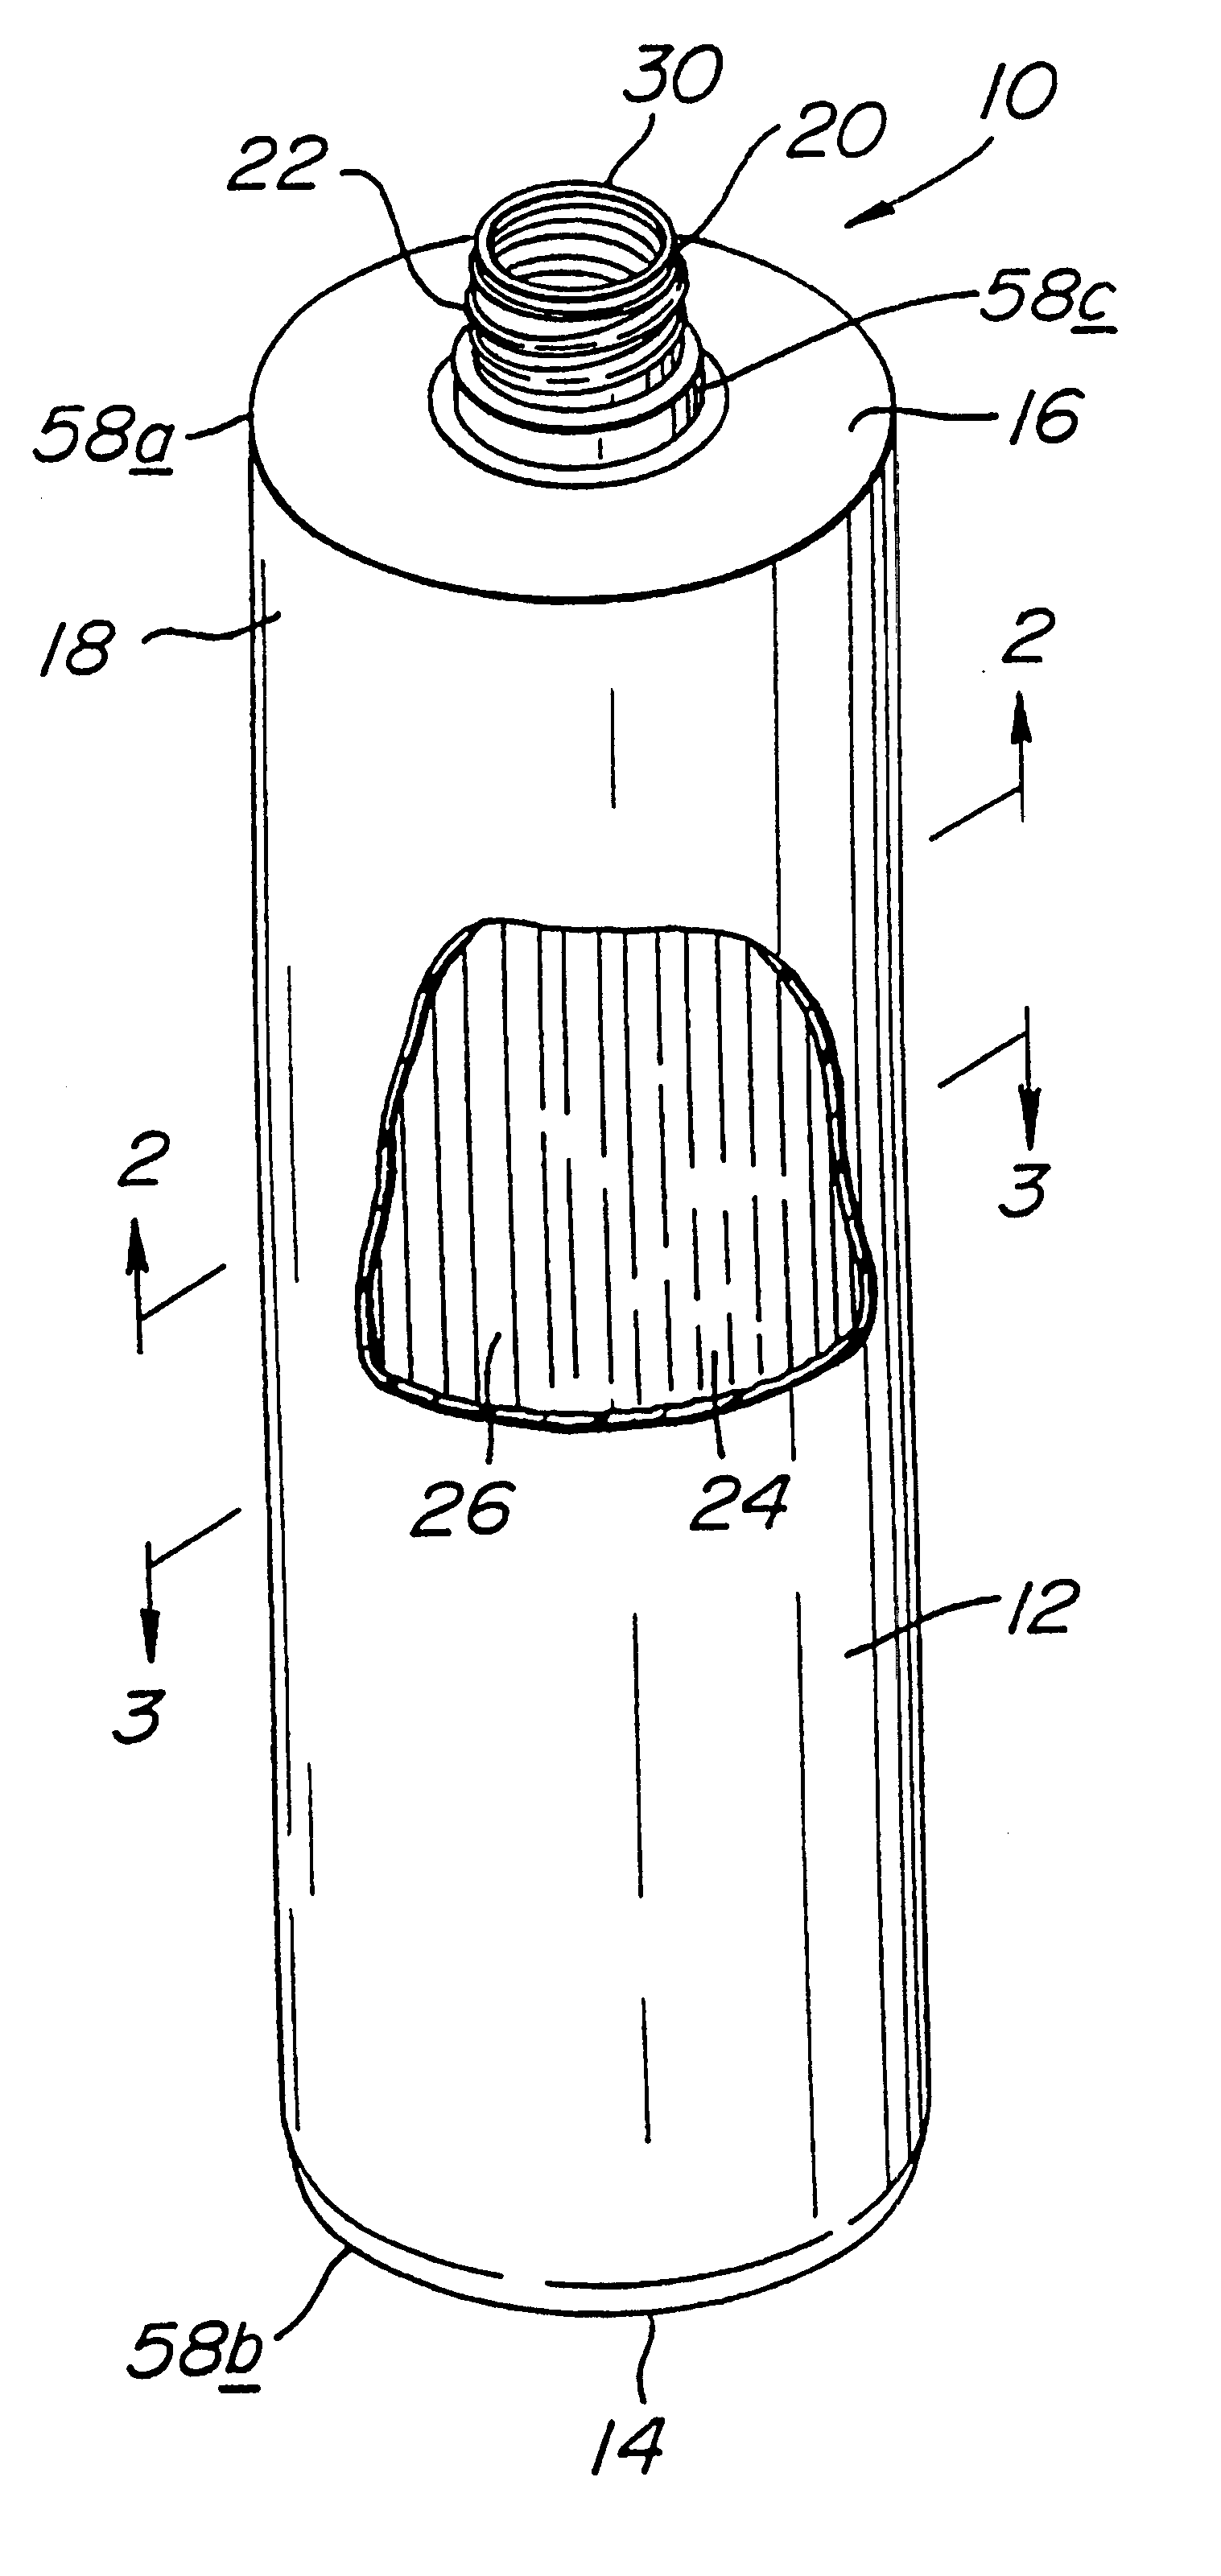 Blow-molded container having reinforcement ribs and method and apparatus for making same